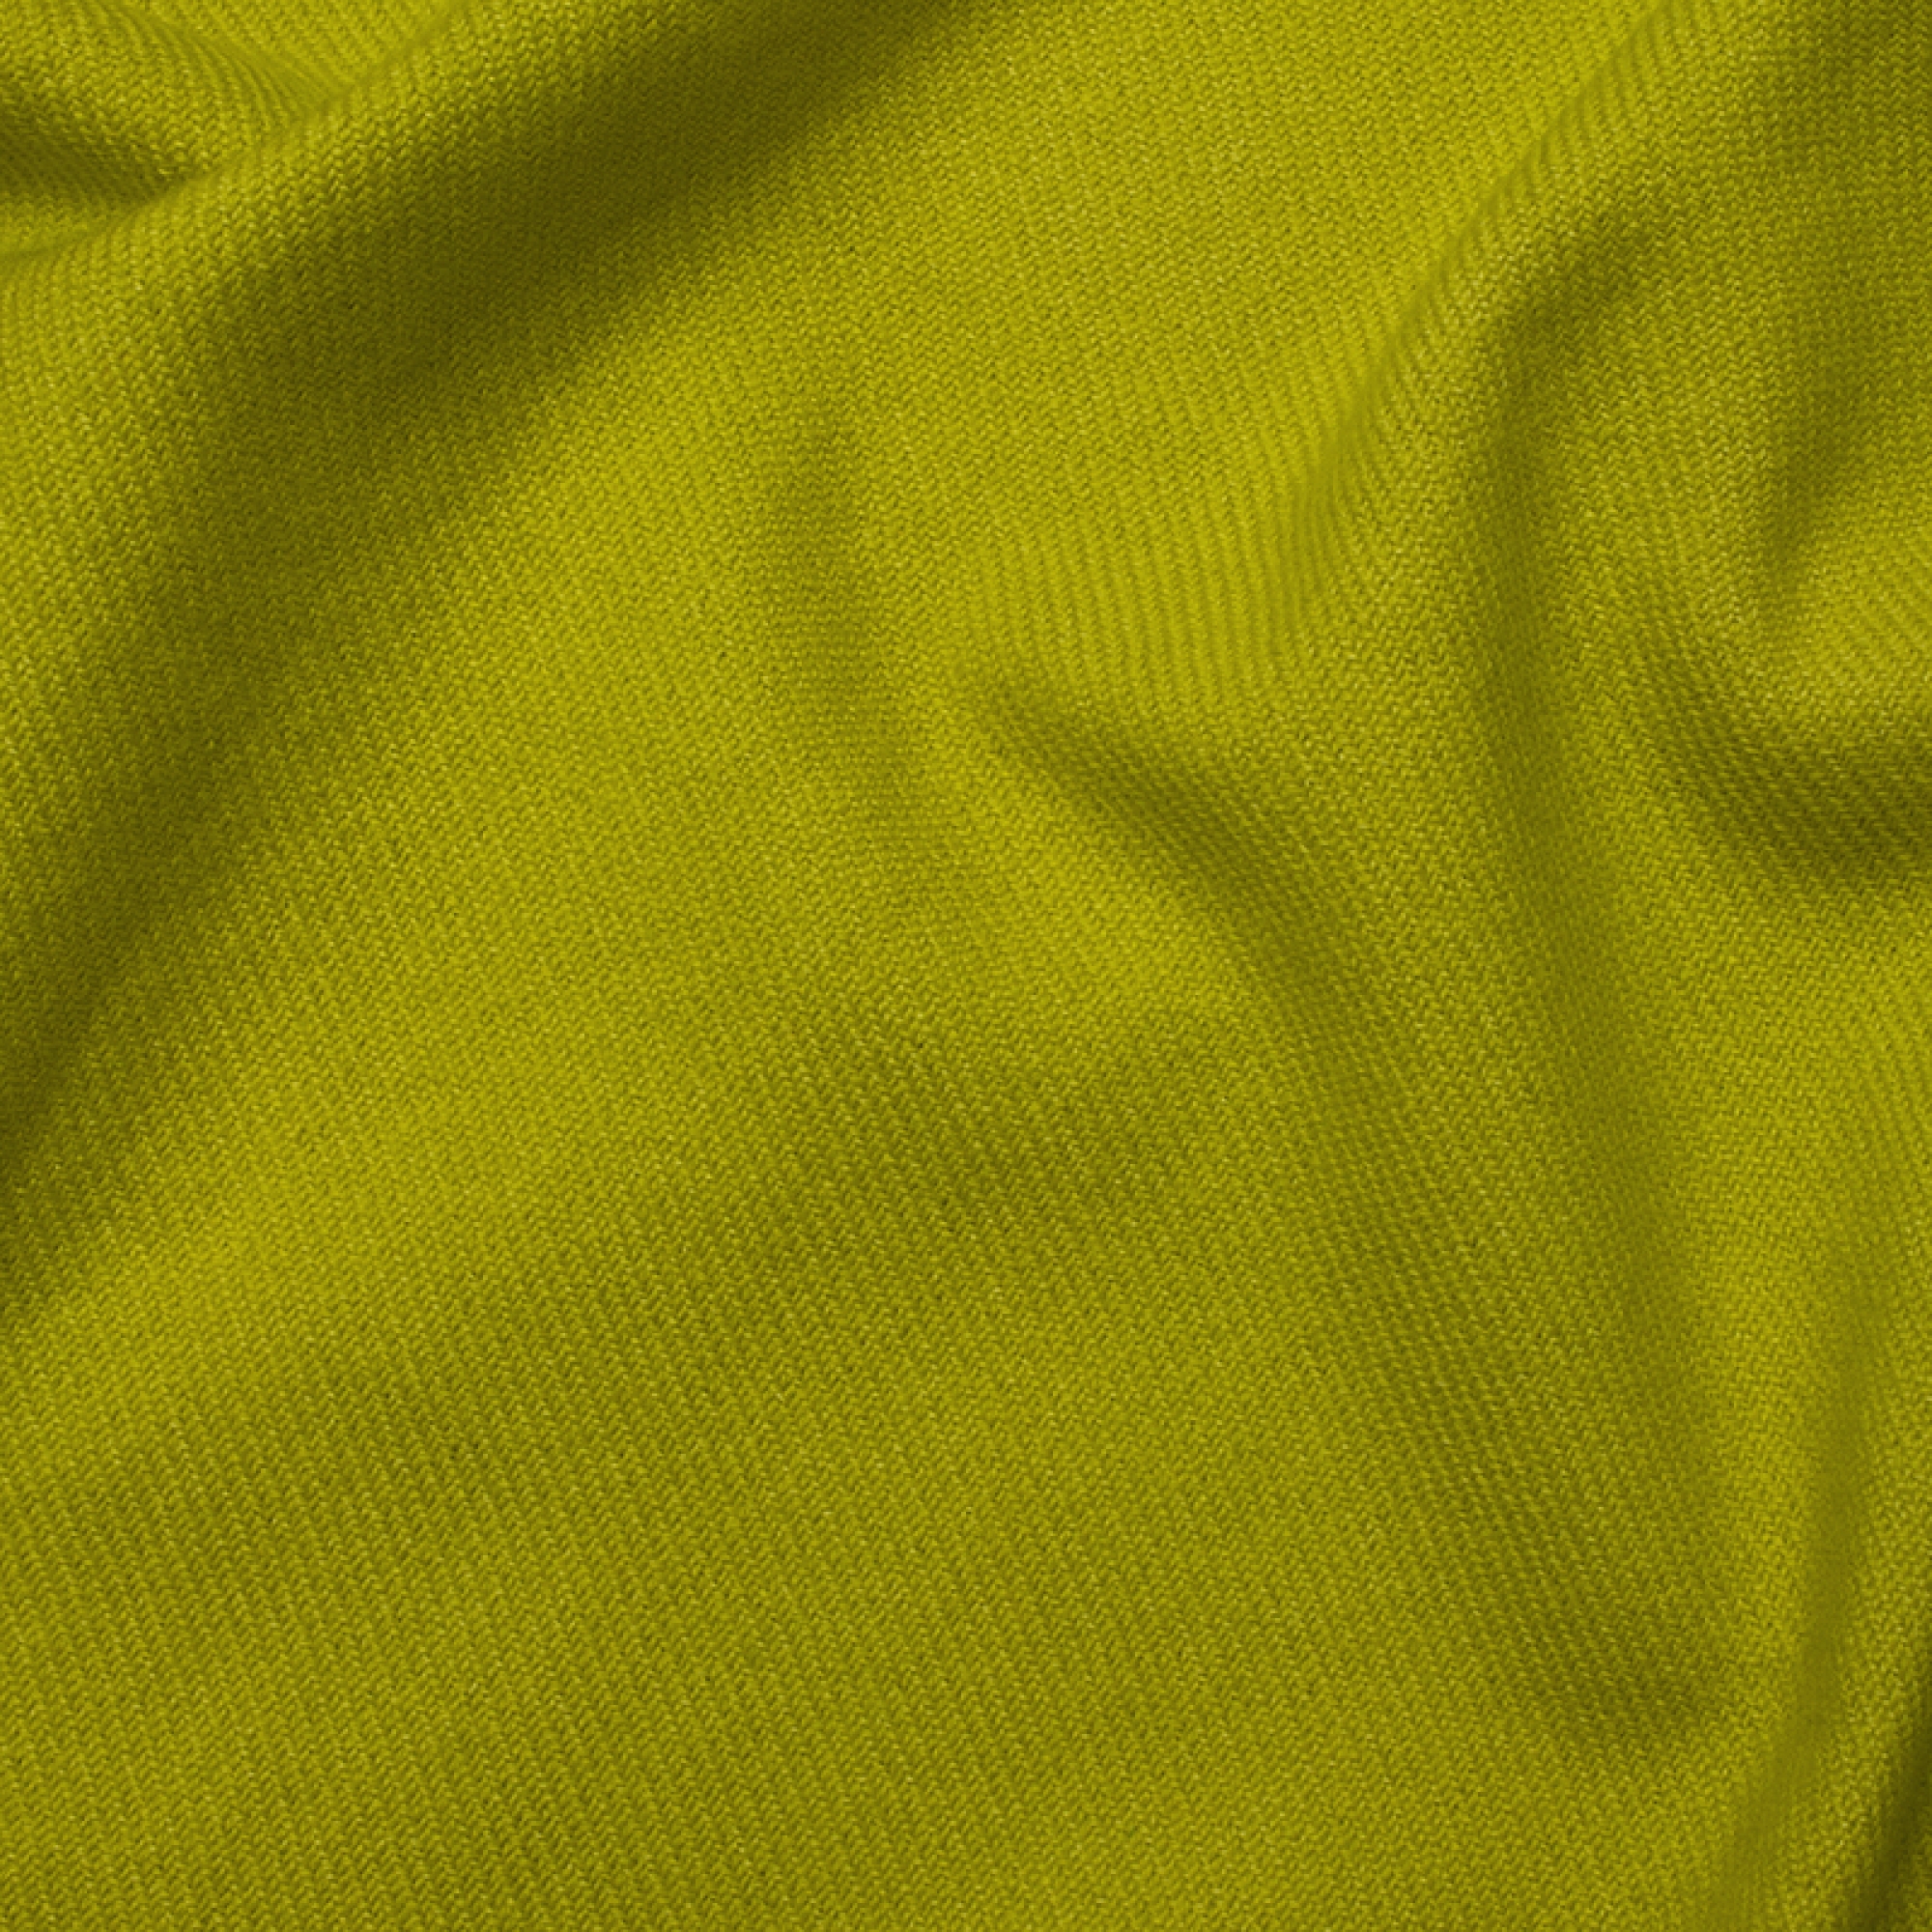 Cashmere uomo cocooning toodoo plain l 220 x 220 verde chartreuse 220x220cm